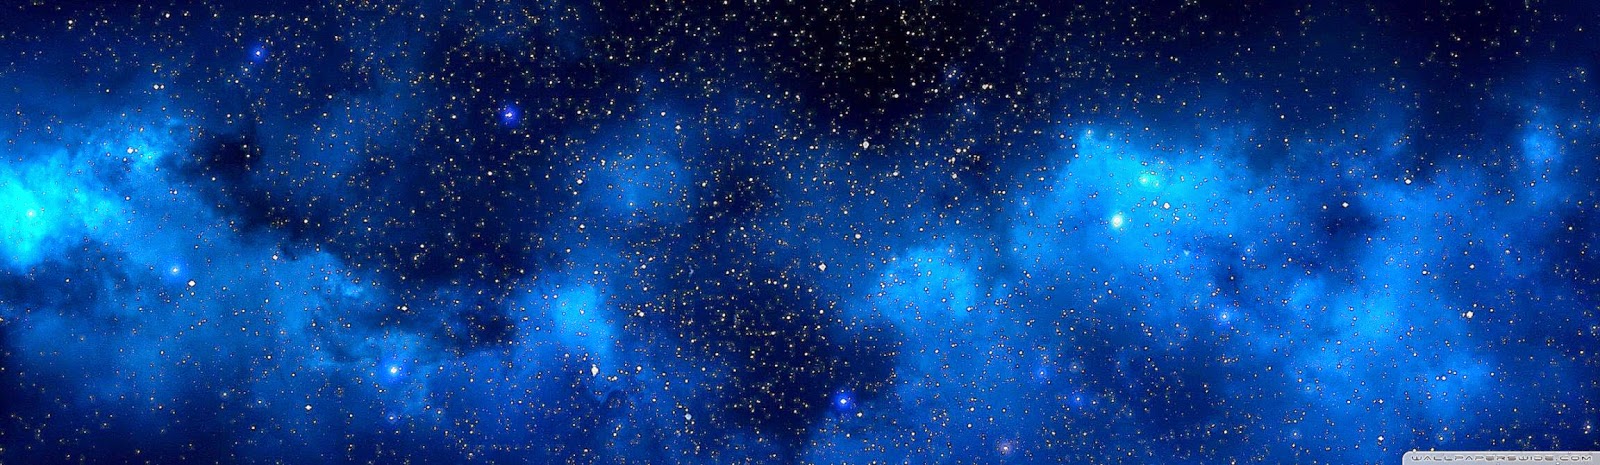 Cool Blue Galaxy Backgrounds , HD Wallpaper & Backgrounds